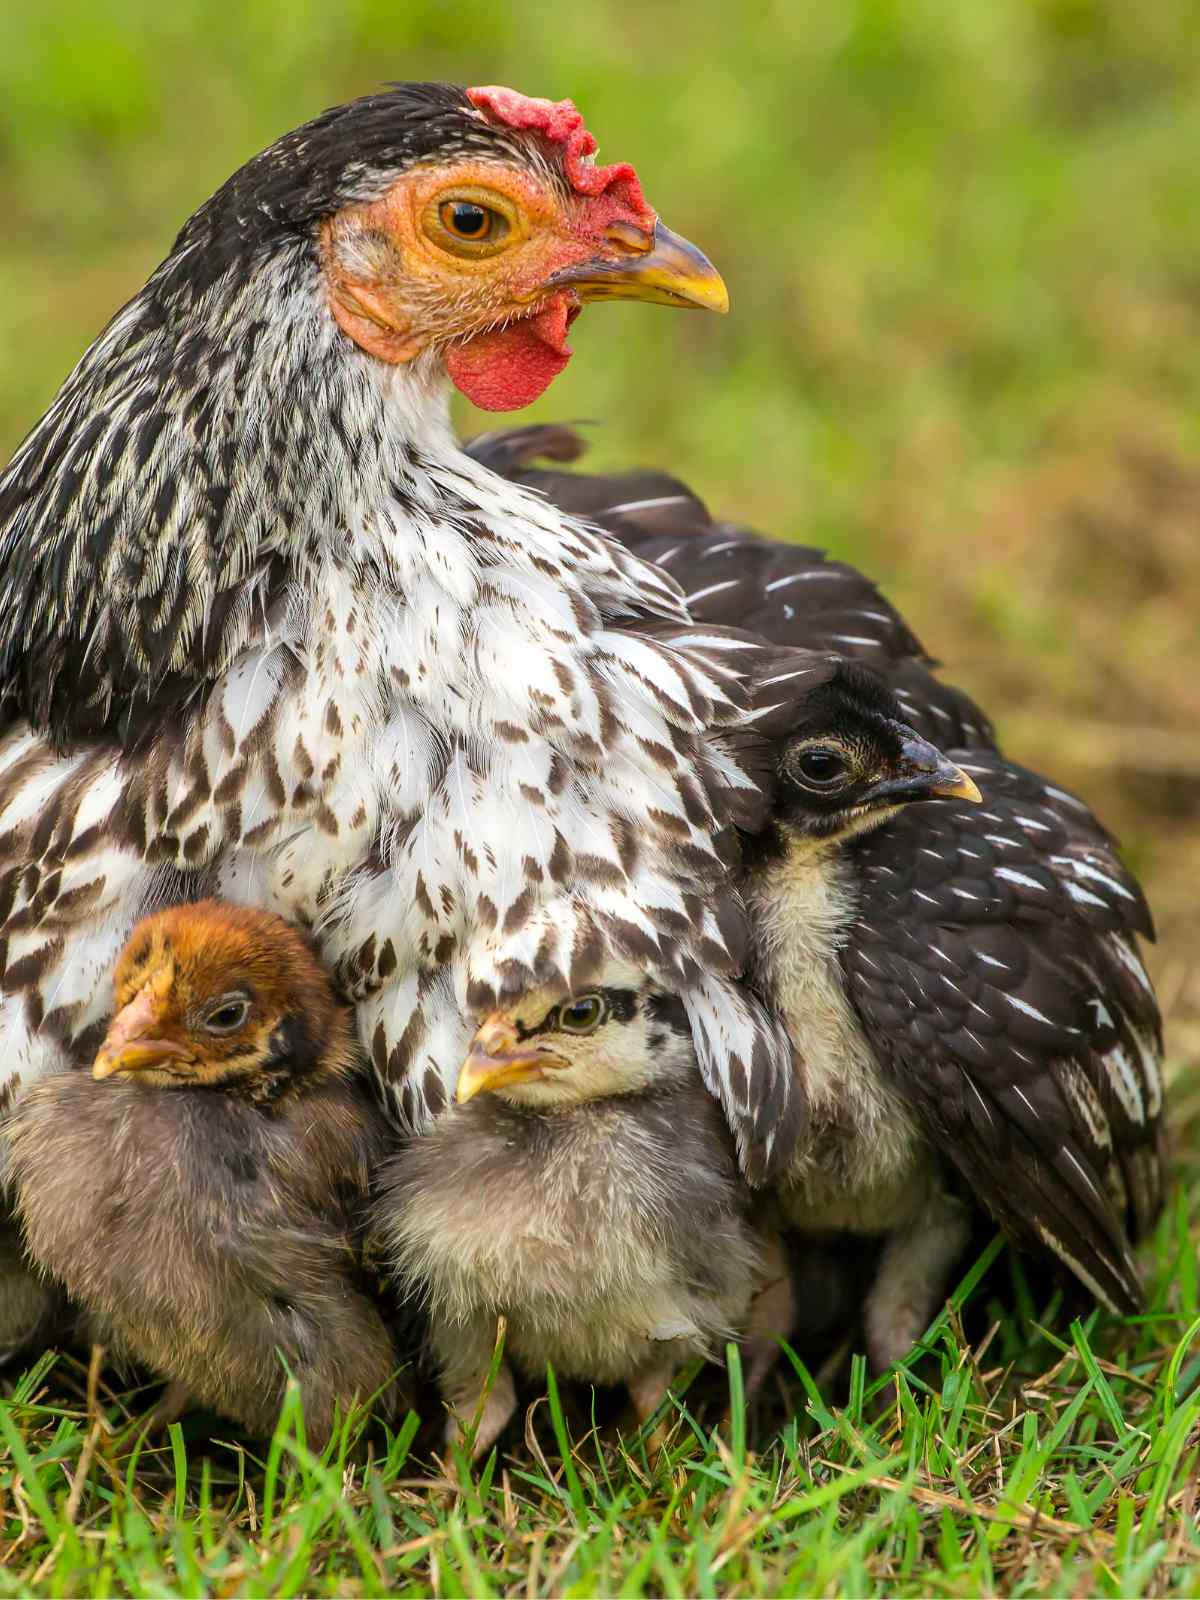 Mother hen with three baby chicks peaking out from under her feathers. Outside in the green grass.